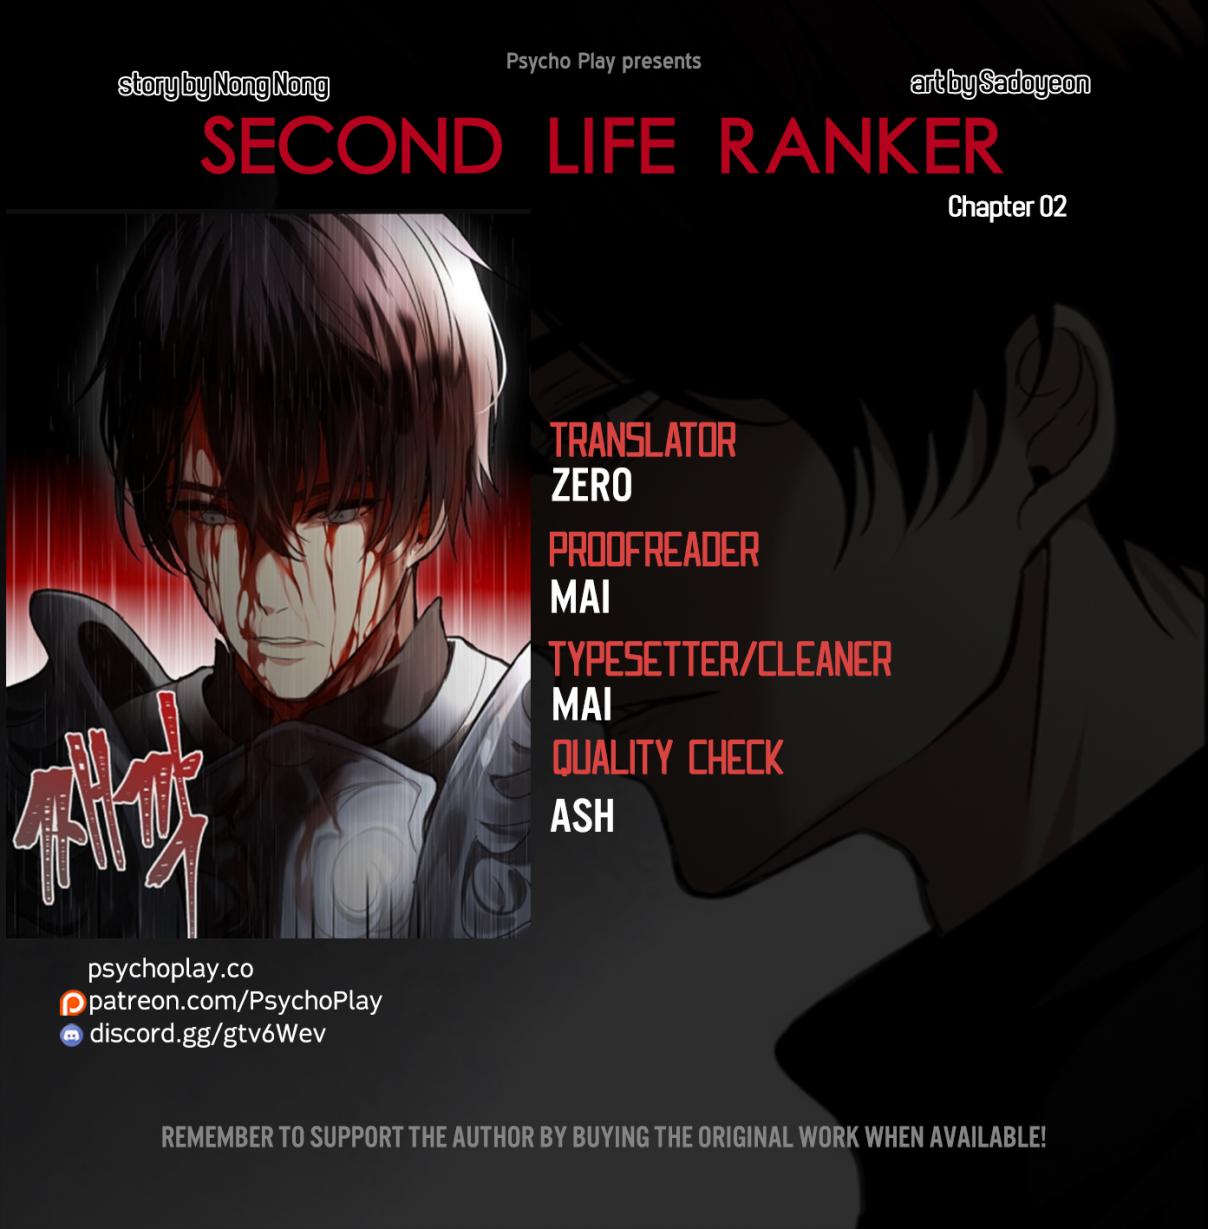 Second Life Ranker Ch. 2 Ranker 2, who lives twice